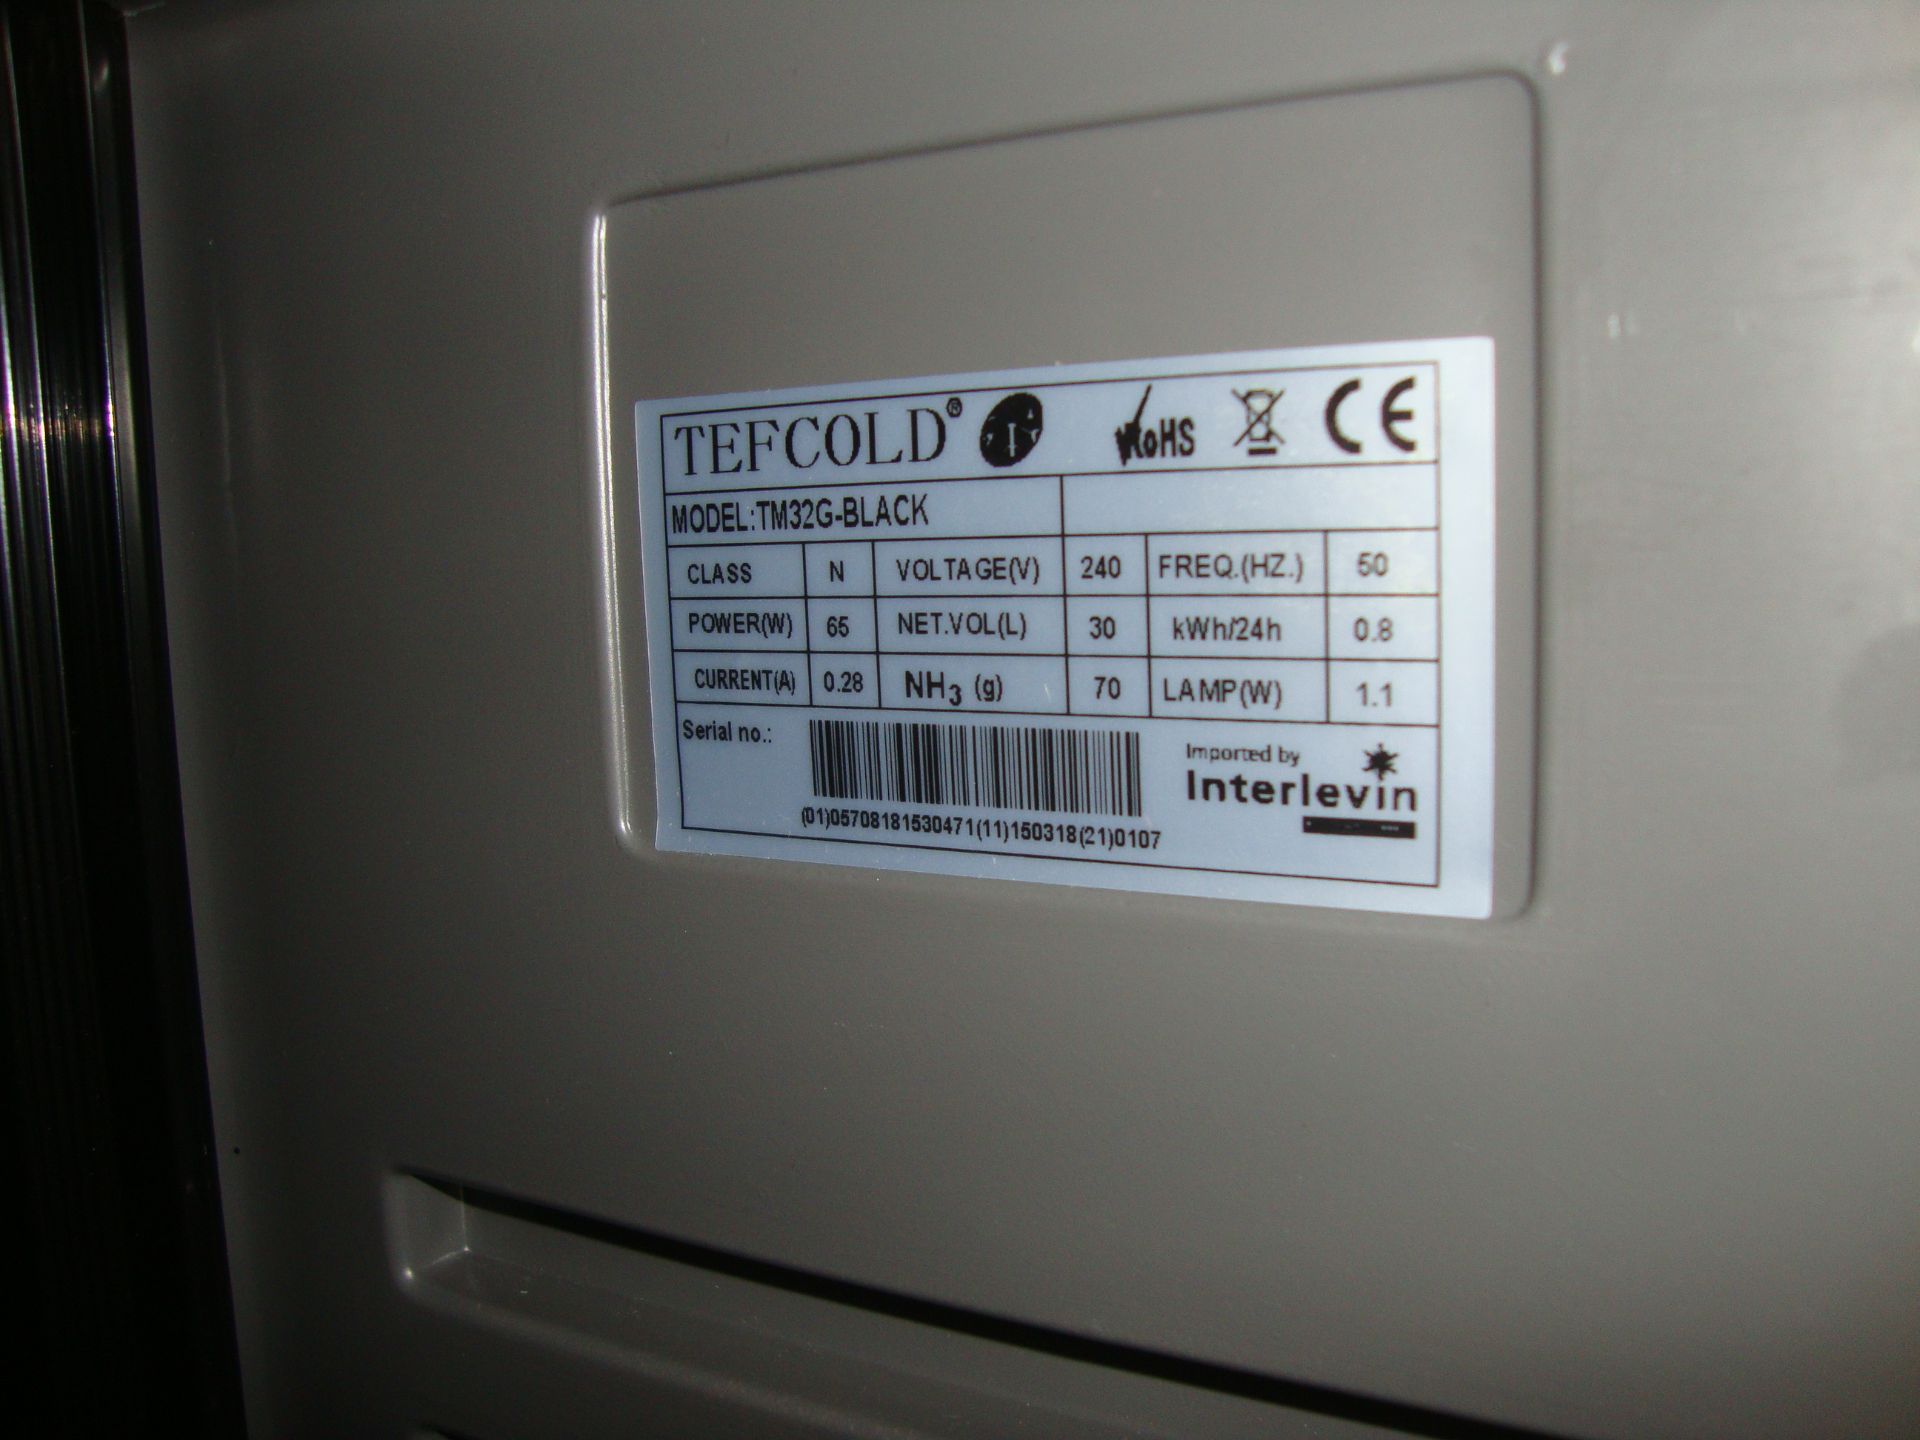 Tefcold mini clear front display fridge model TM32G - BlackIMPORTANT: Please remember goods - Image 3 of 3